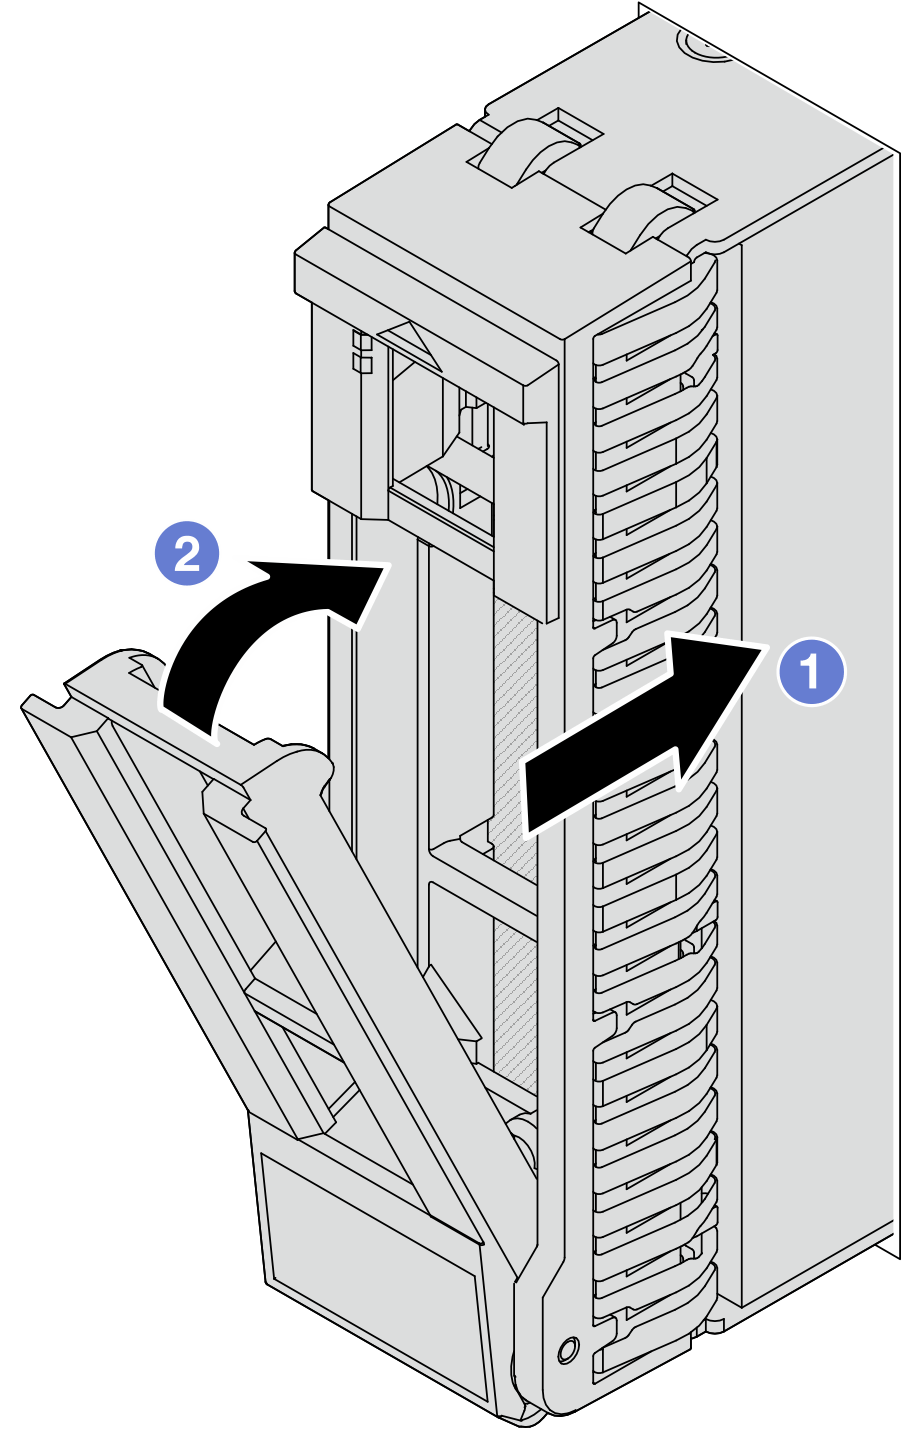 Opening the drive tray handle